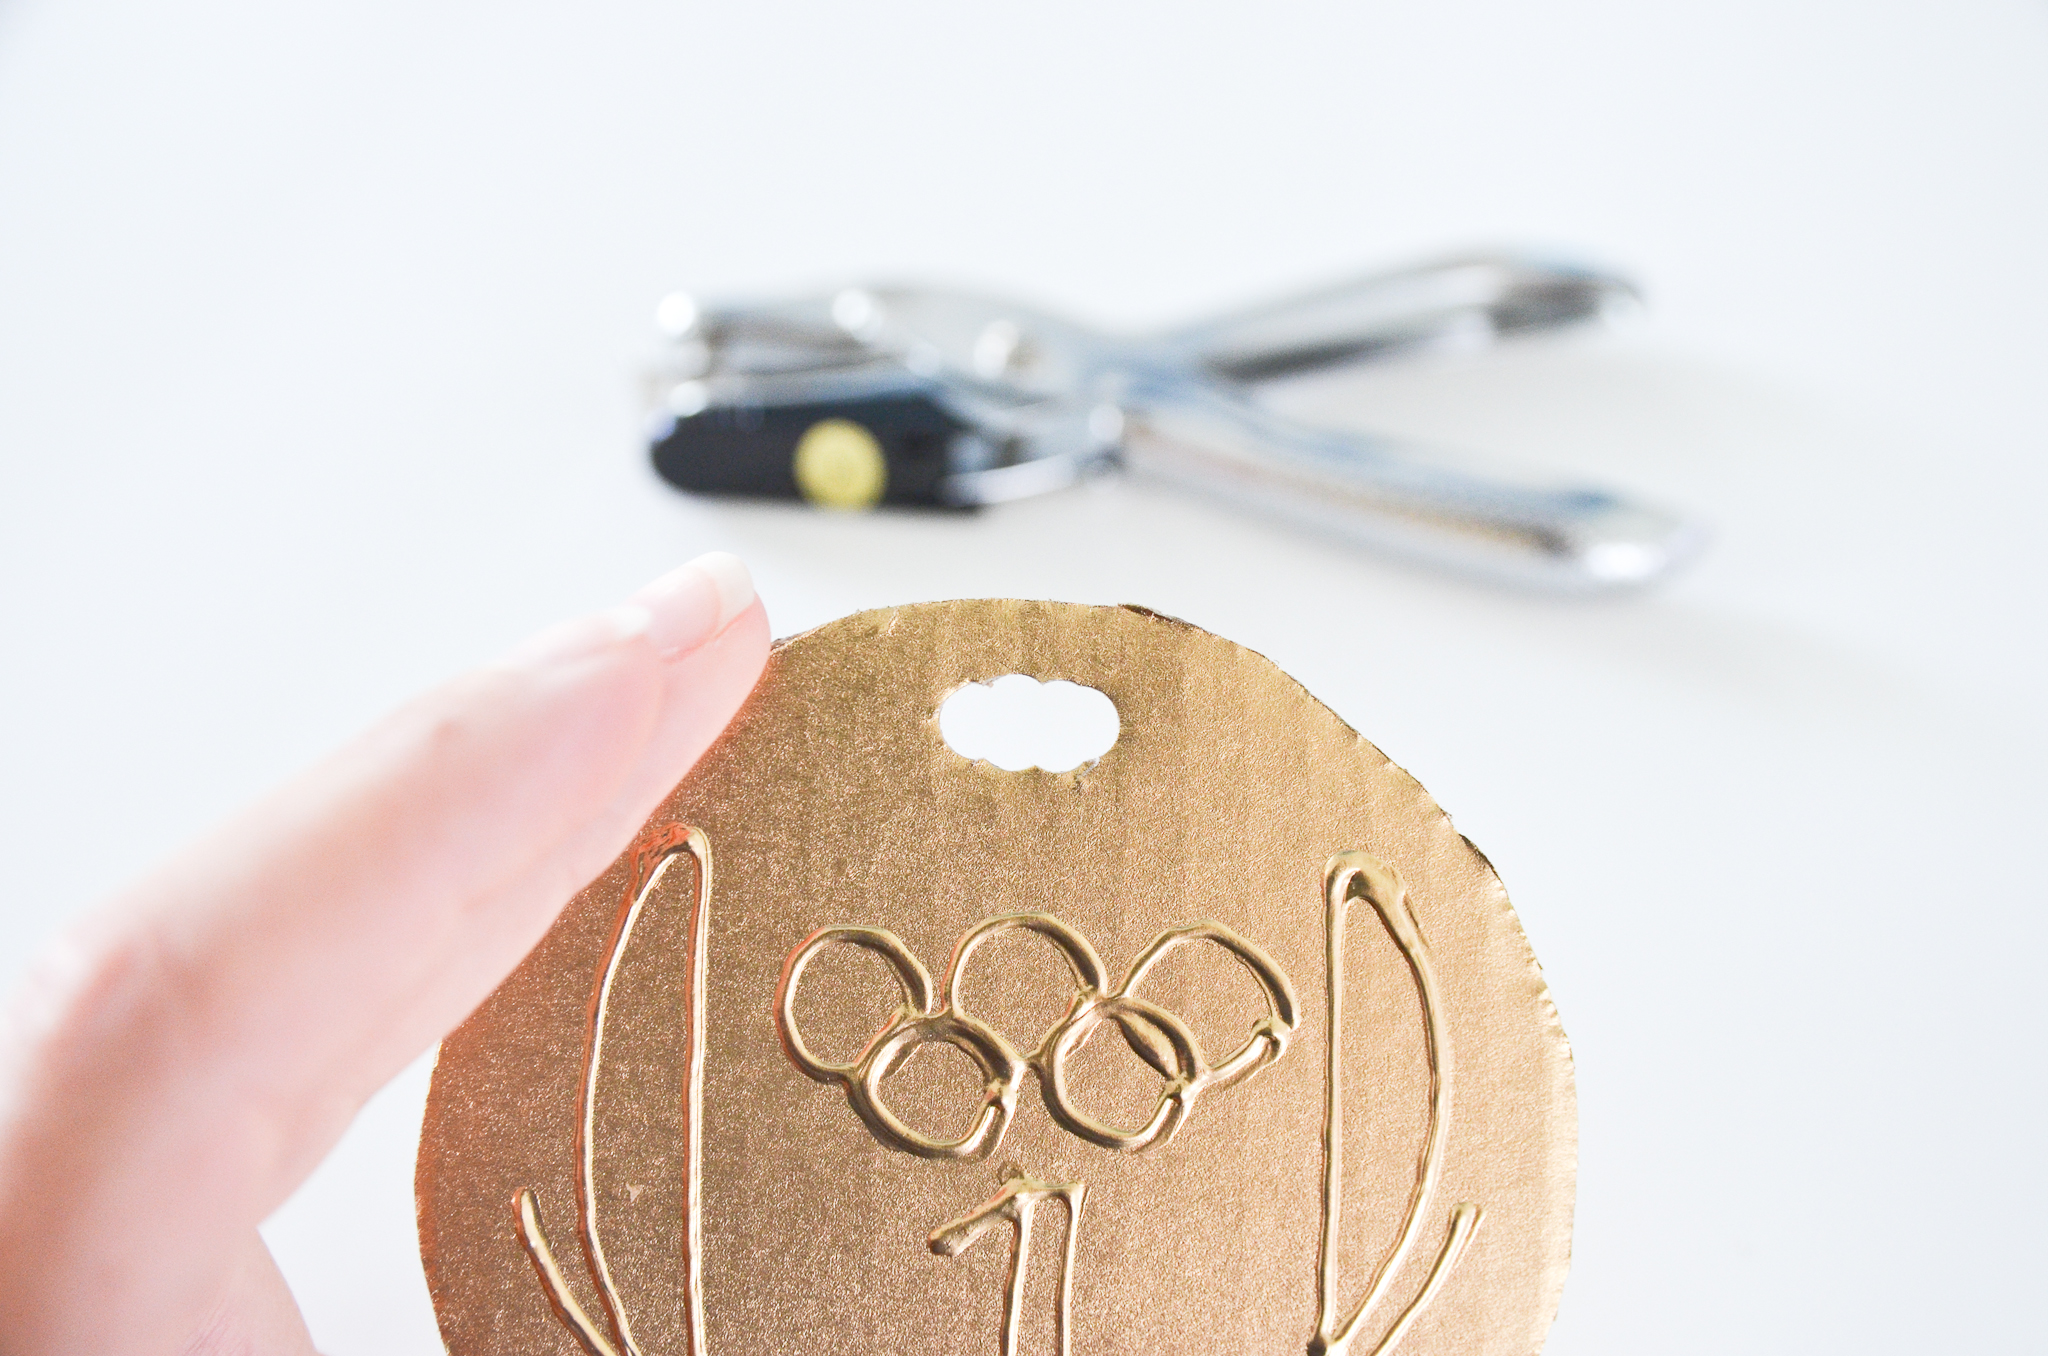 DIY Olympic Medals for Kids